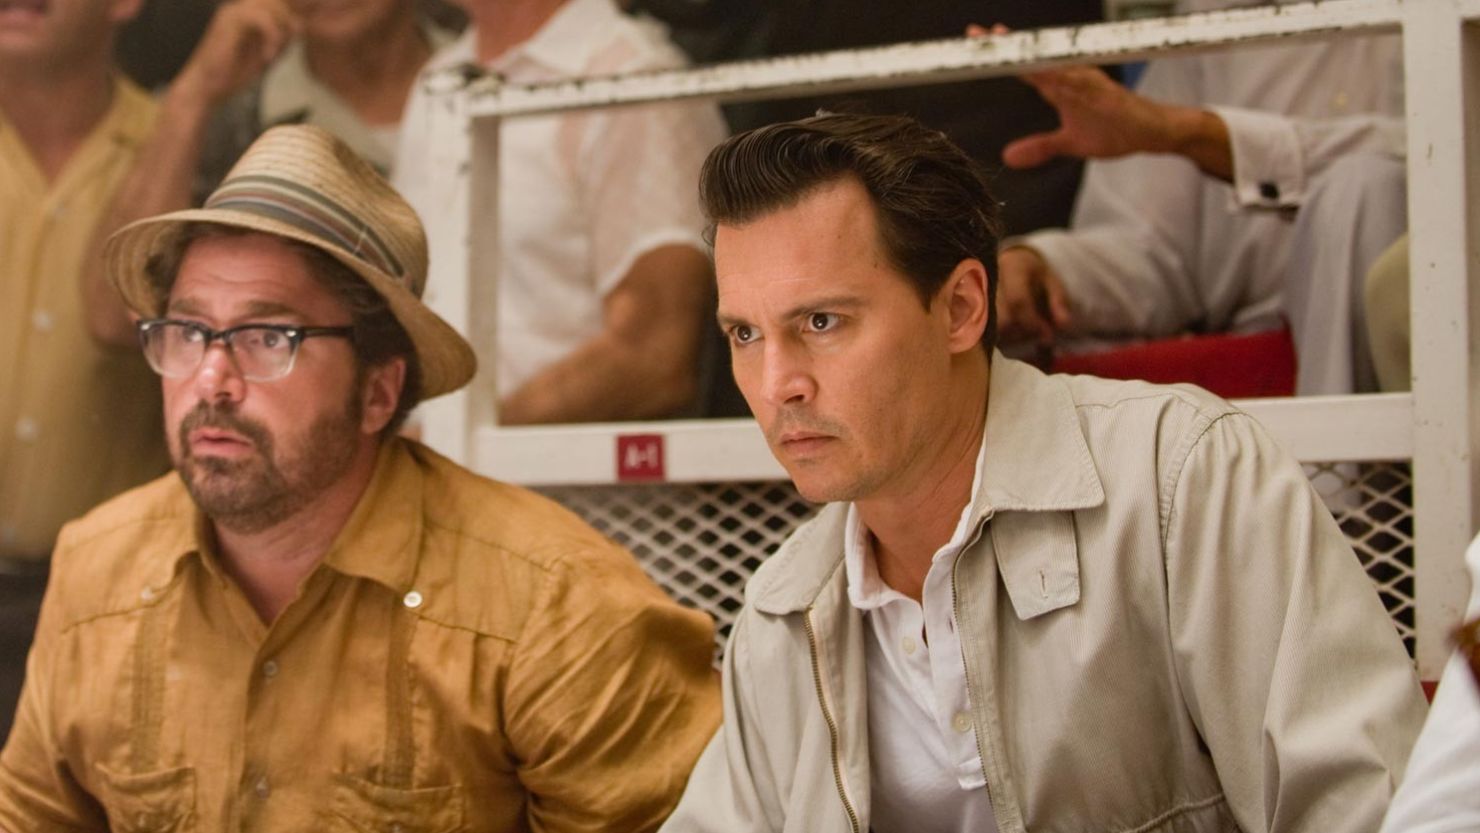 Paul Kemp (Johnny Depp, right) tries to figure out his place in paradise in "The Rum Diary."